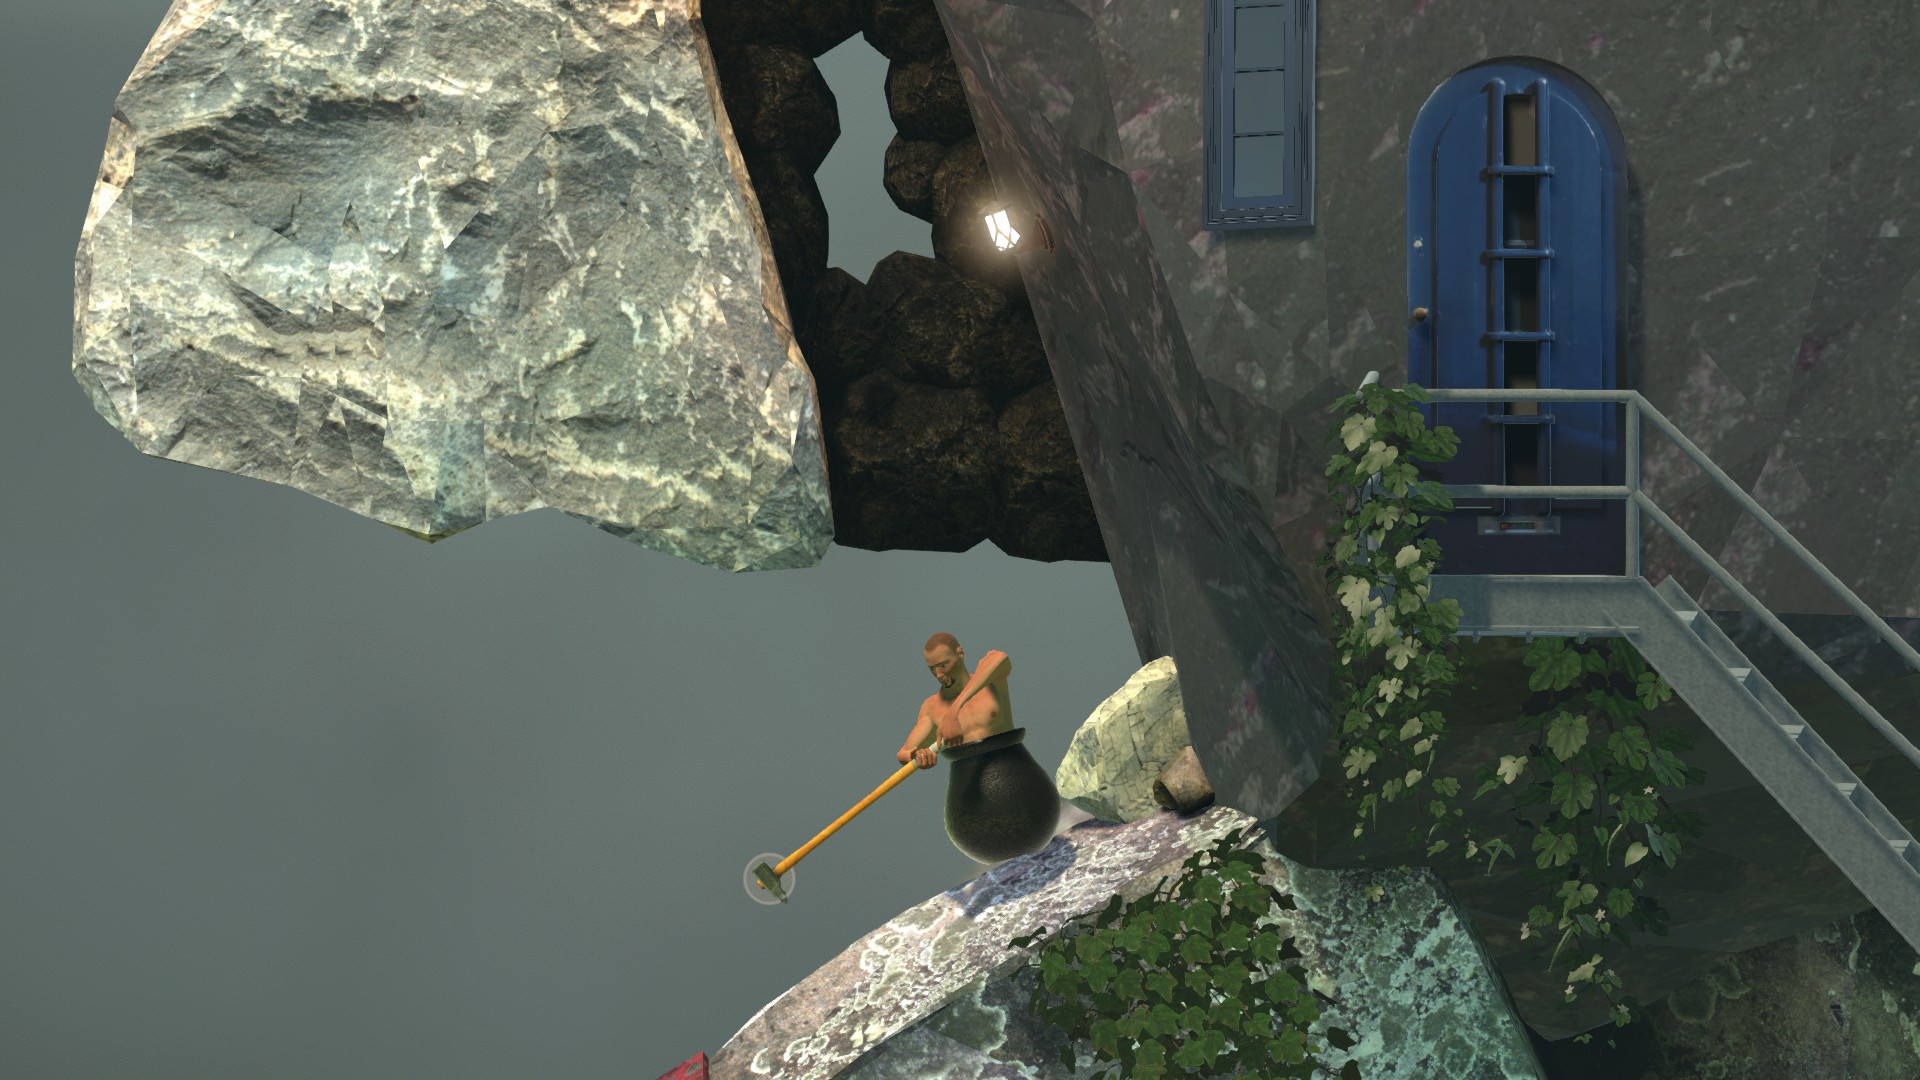 Getting Over It With Bennett Foddy: I Laugh, I Cry, I Continue. – The  Refined Geek